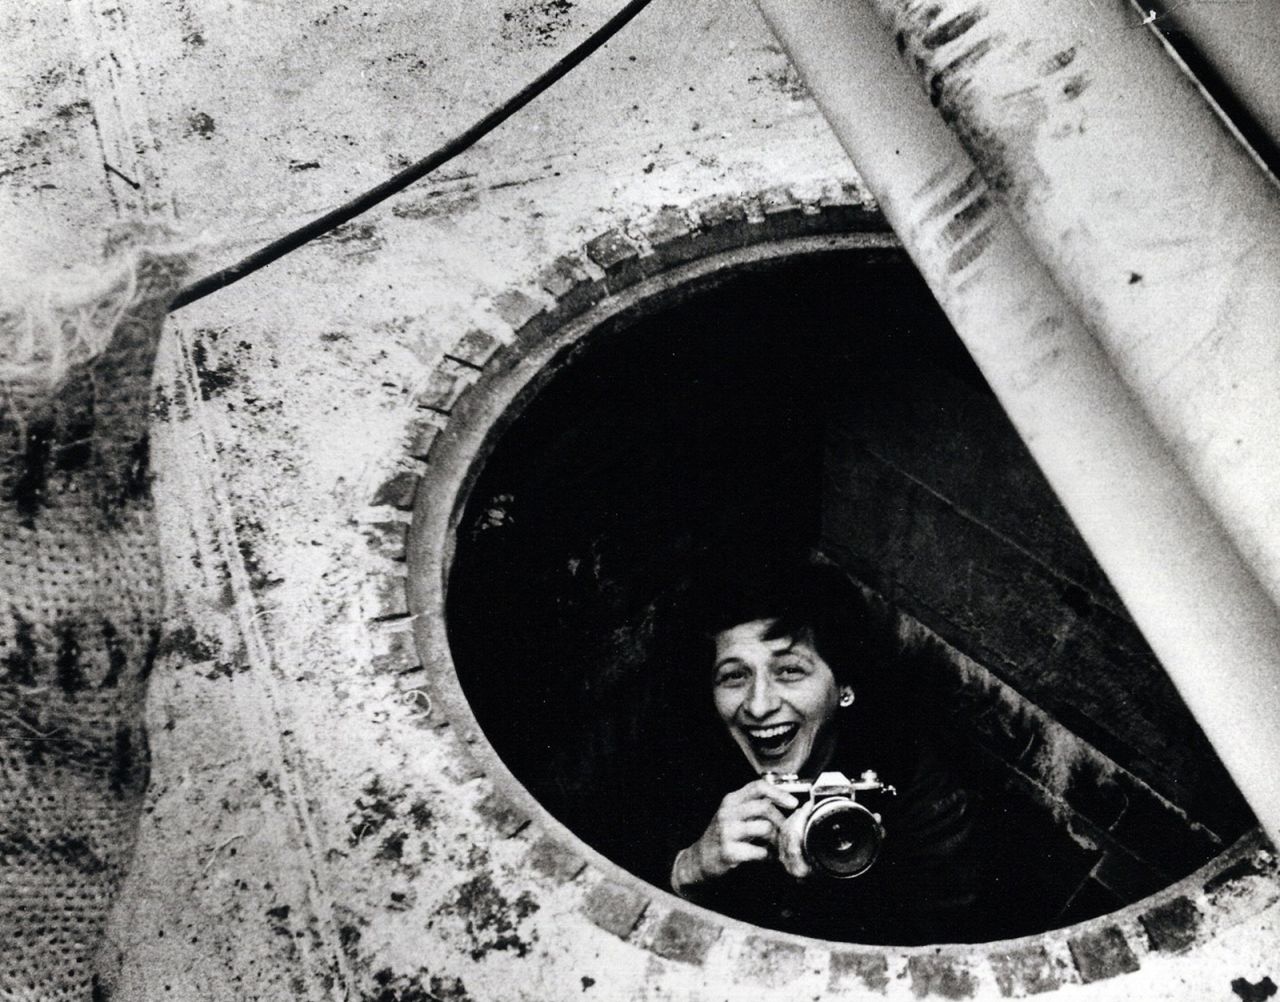 Charlotte Brooks stands inside a manhole in this photo from 1957. Brooks was the only female staff photographer at Look, a biweekly American magazine that highlighted general-interest stories from 1937 to 1971. At a time when many women were confined to softer news, Brooks covered the same issues that her male peers were covering, including politics and race. 